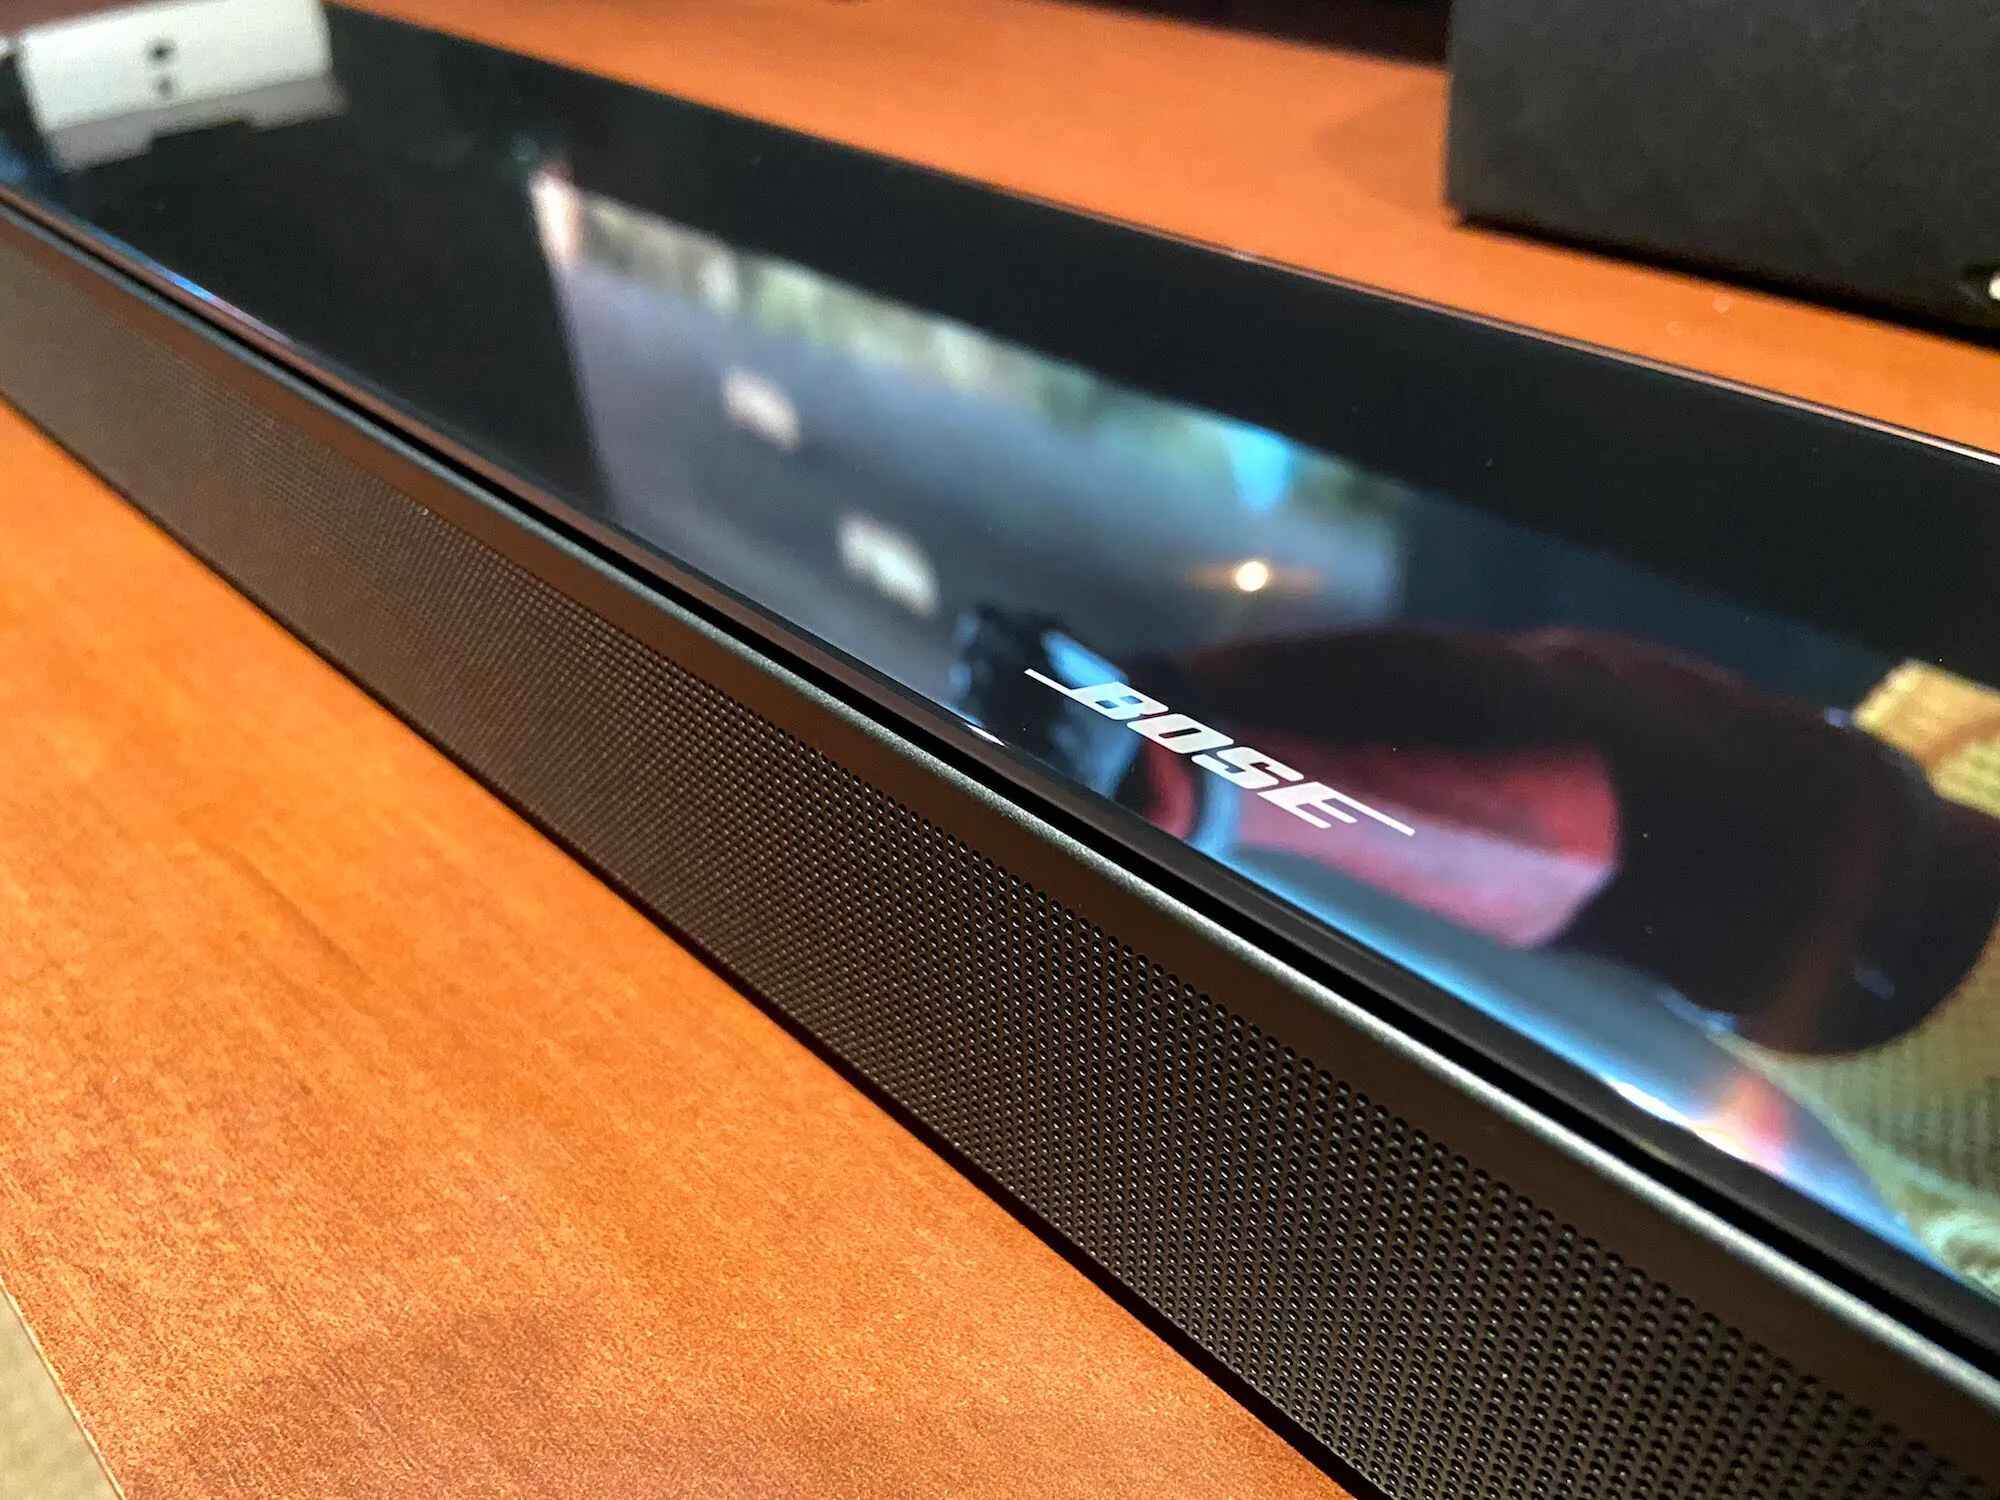 How To Reset Bose Soundbar 700 Without A Remote